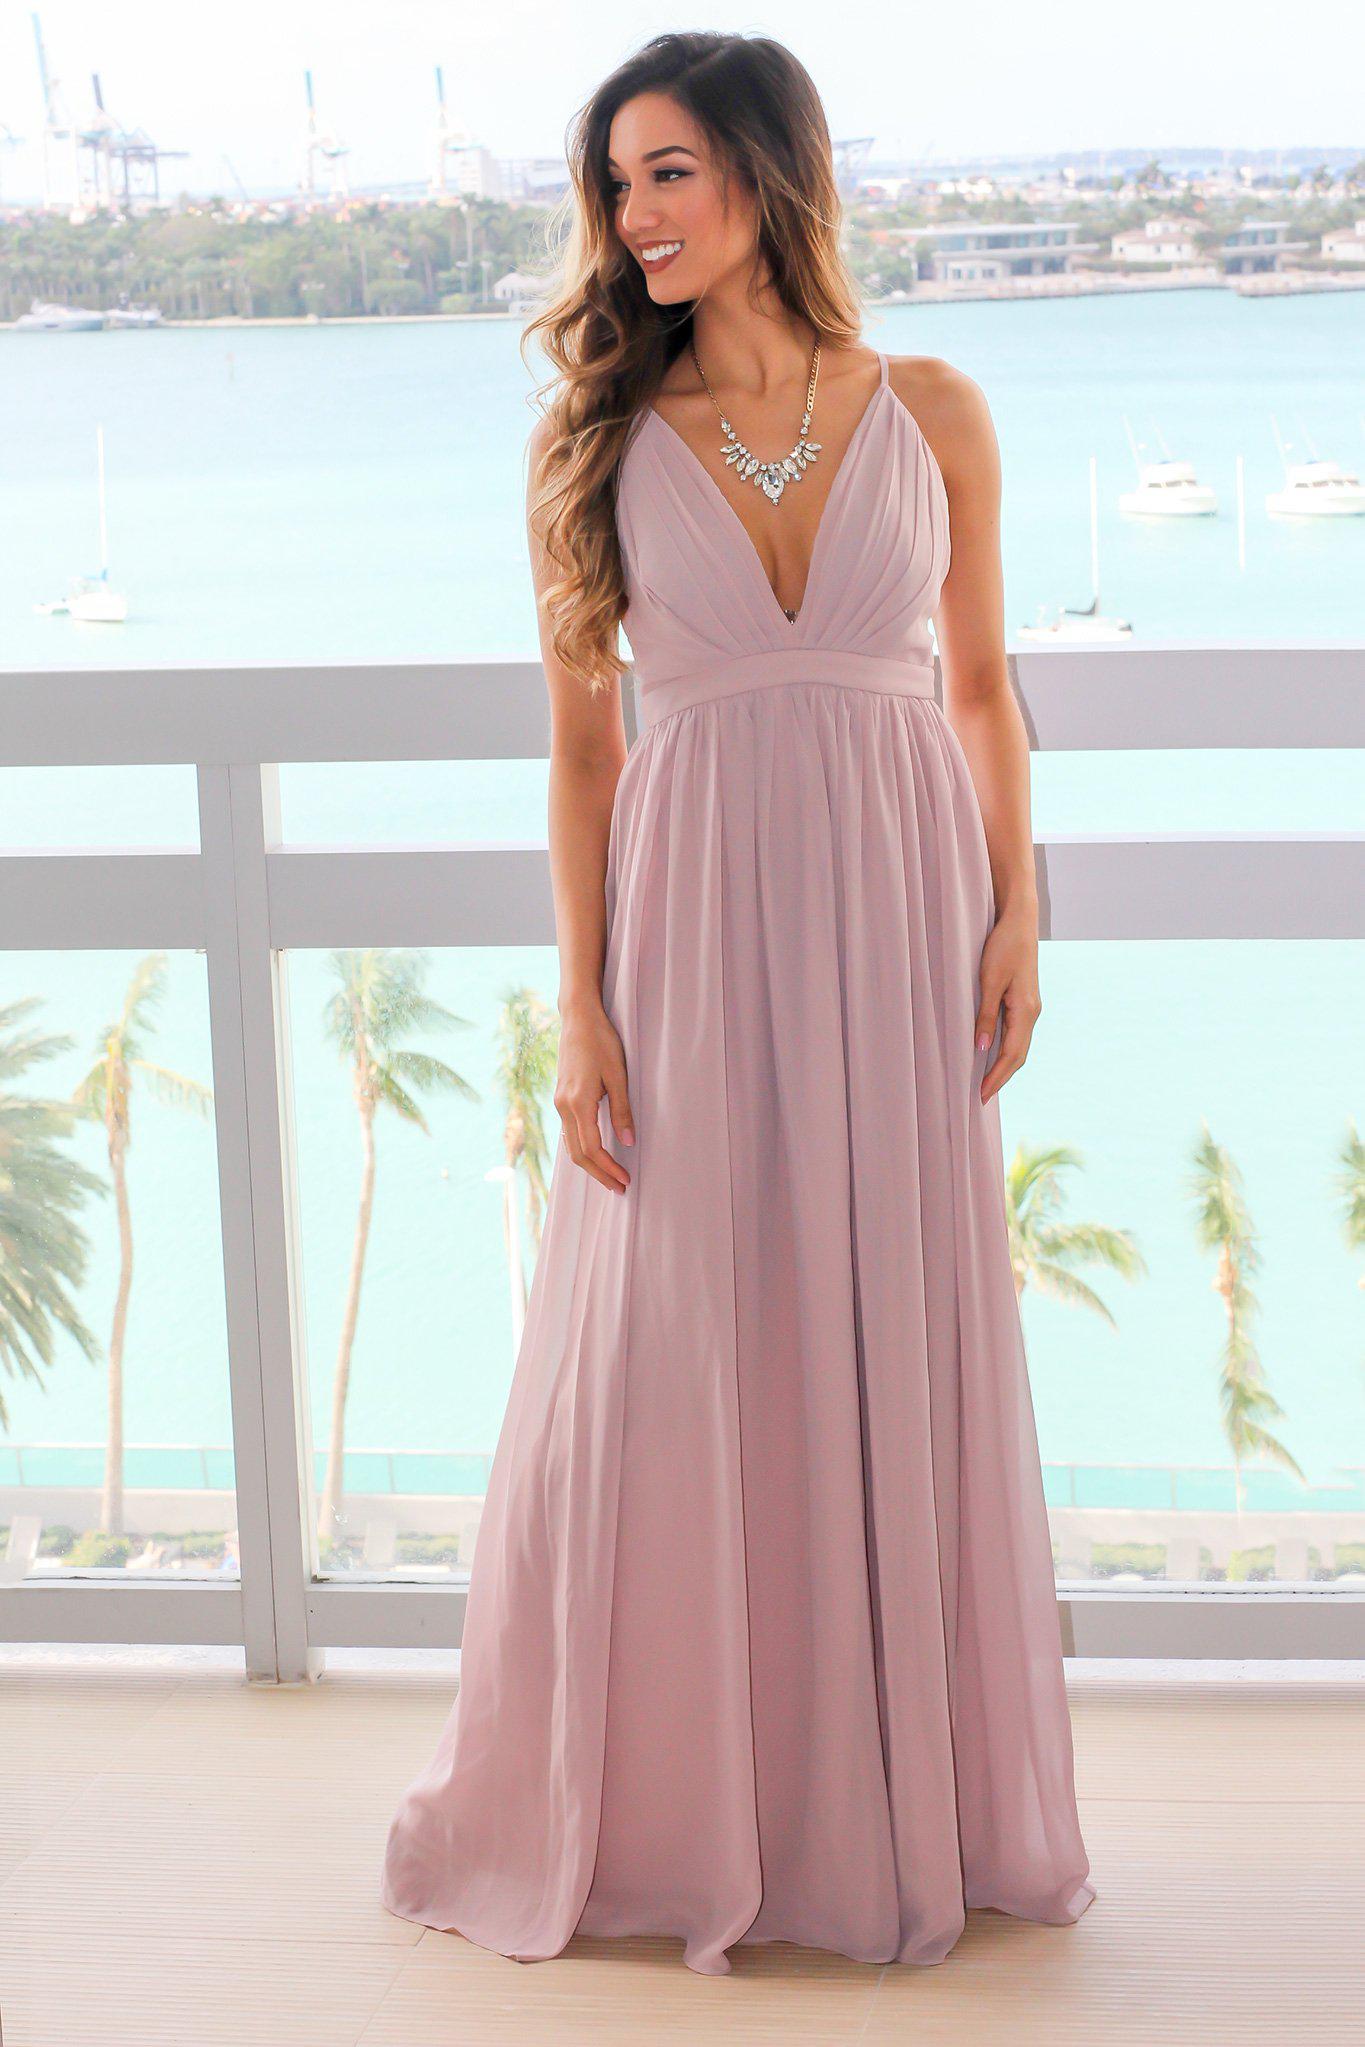 Tan Maxi Dress with Criss Cross Back and Pleated Top